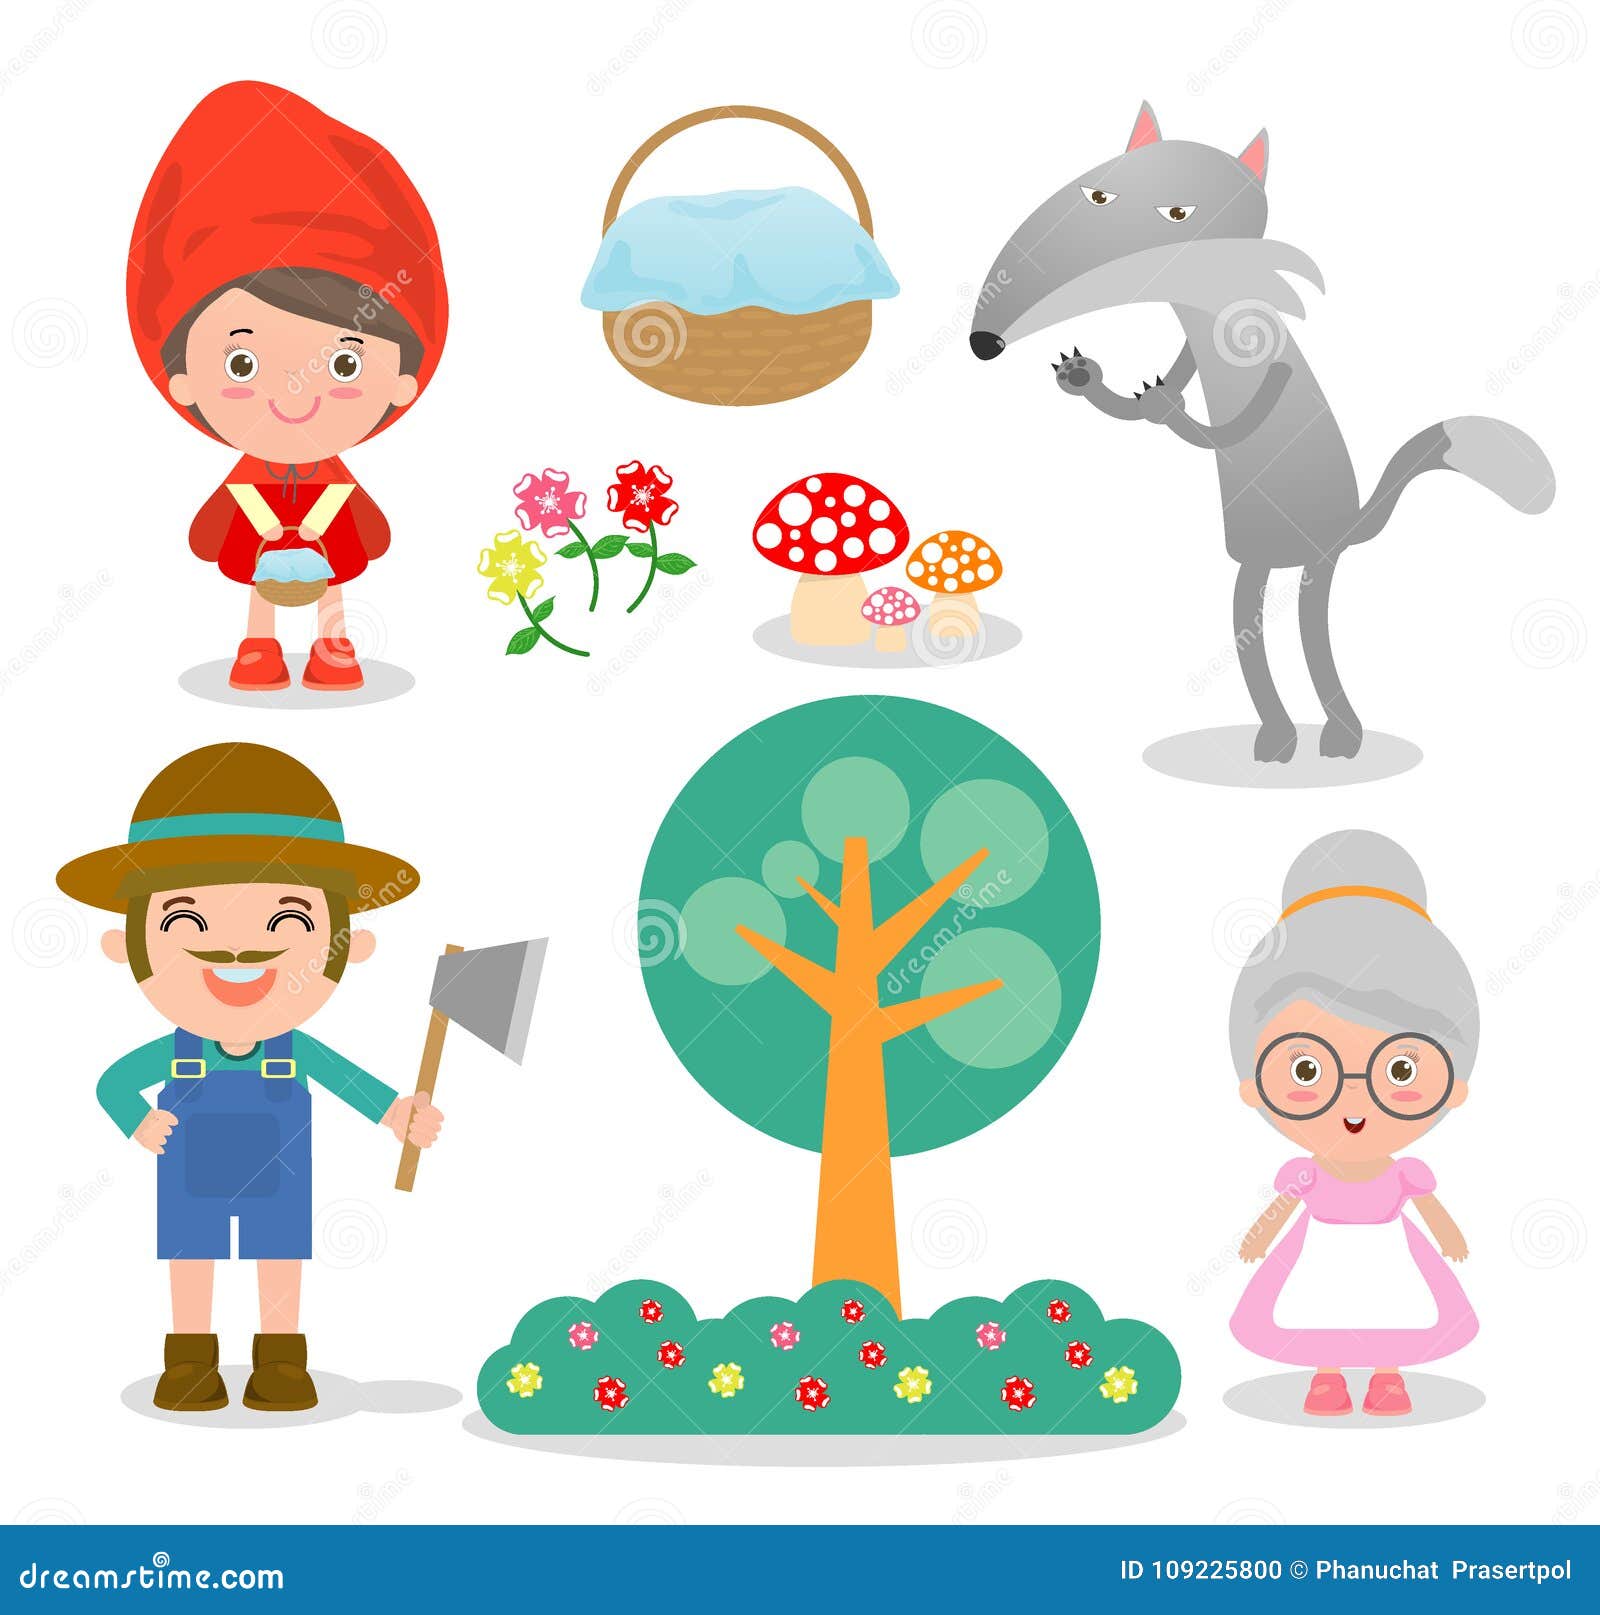 Set Of Characters From Little Red Riding Hood Fairy Tale On White Background Vector Illustration Editorial Image Illustration Of Grandmother Fairy